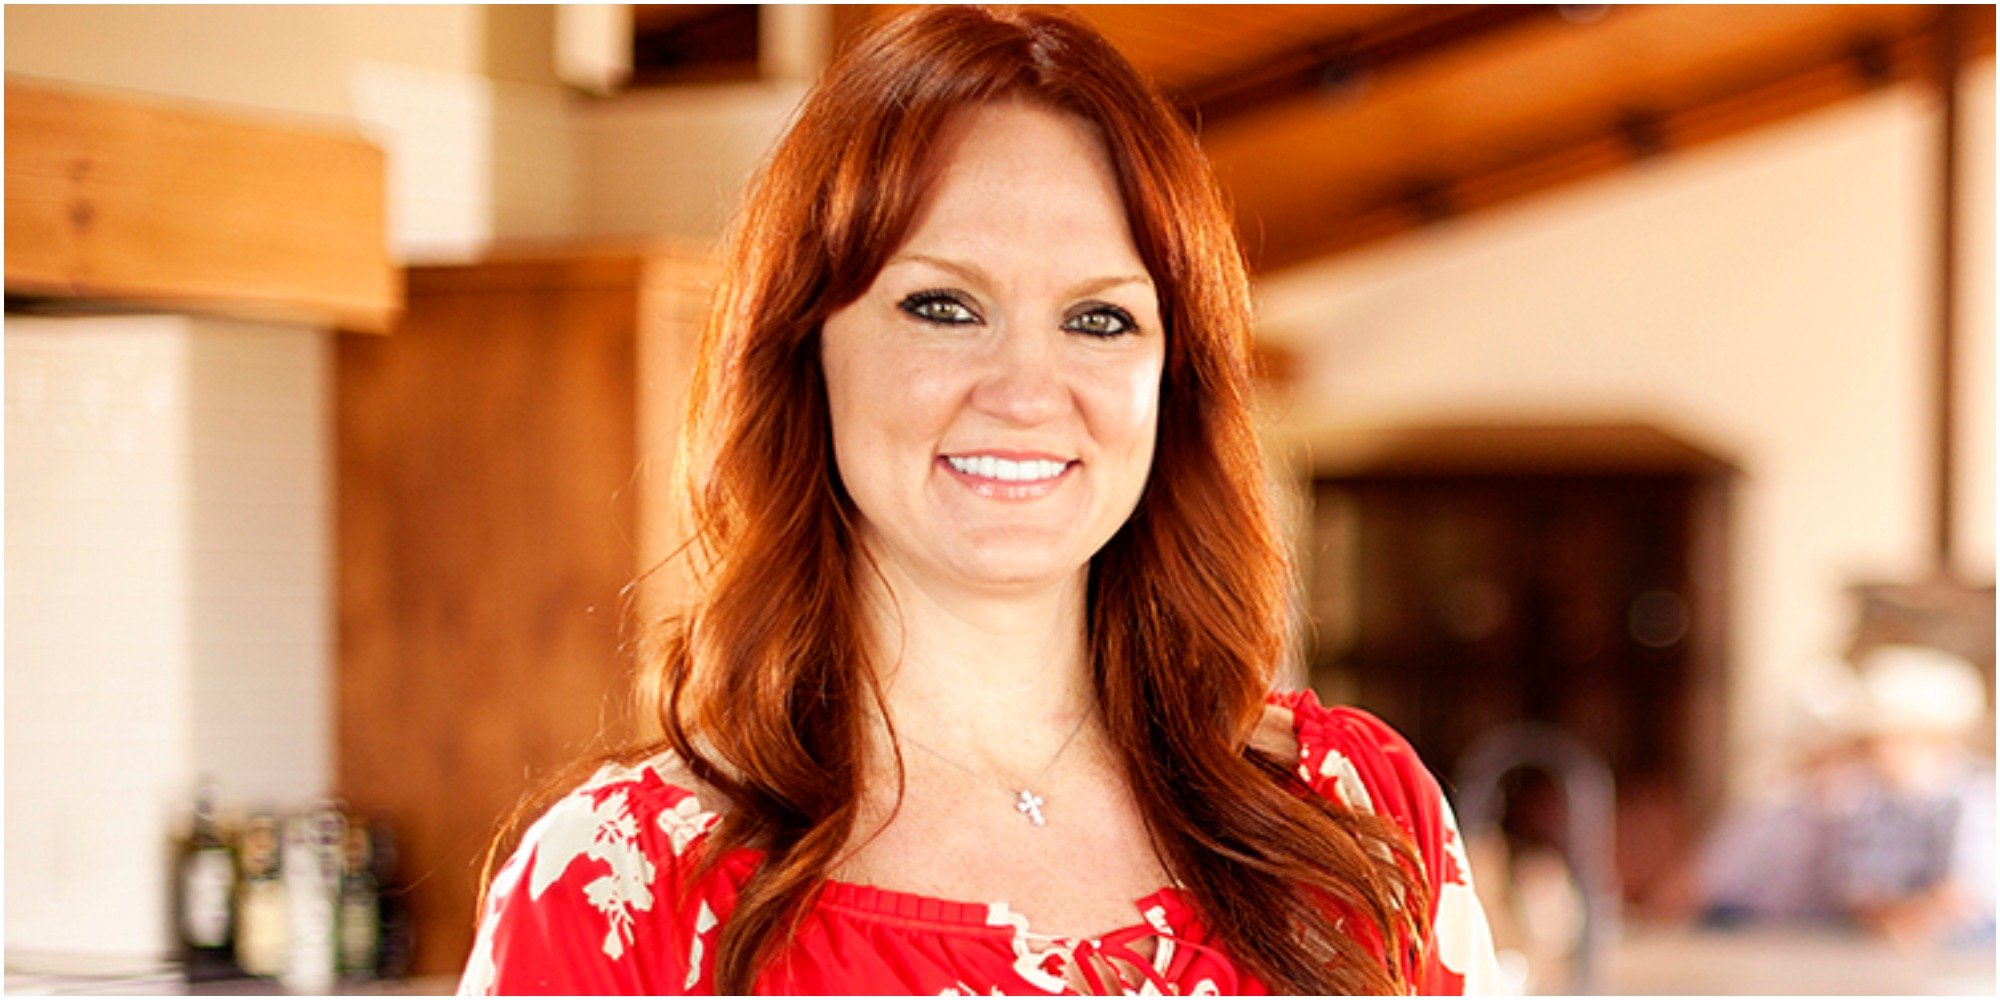 Ree Drummond wears a red blouse on the set of her Food Network Show 'The Pioneer Woman.'